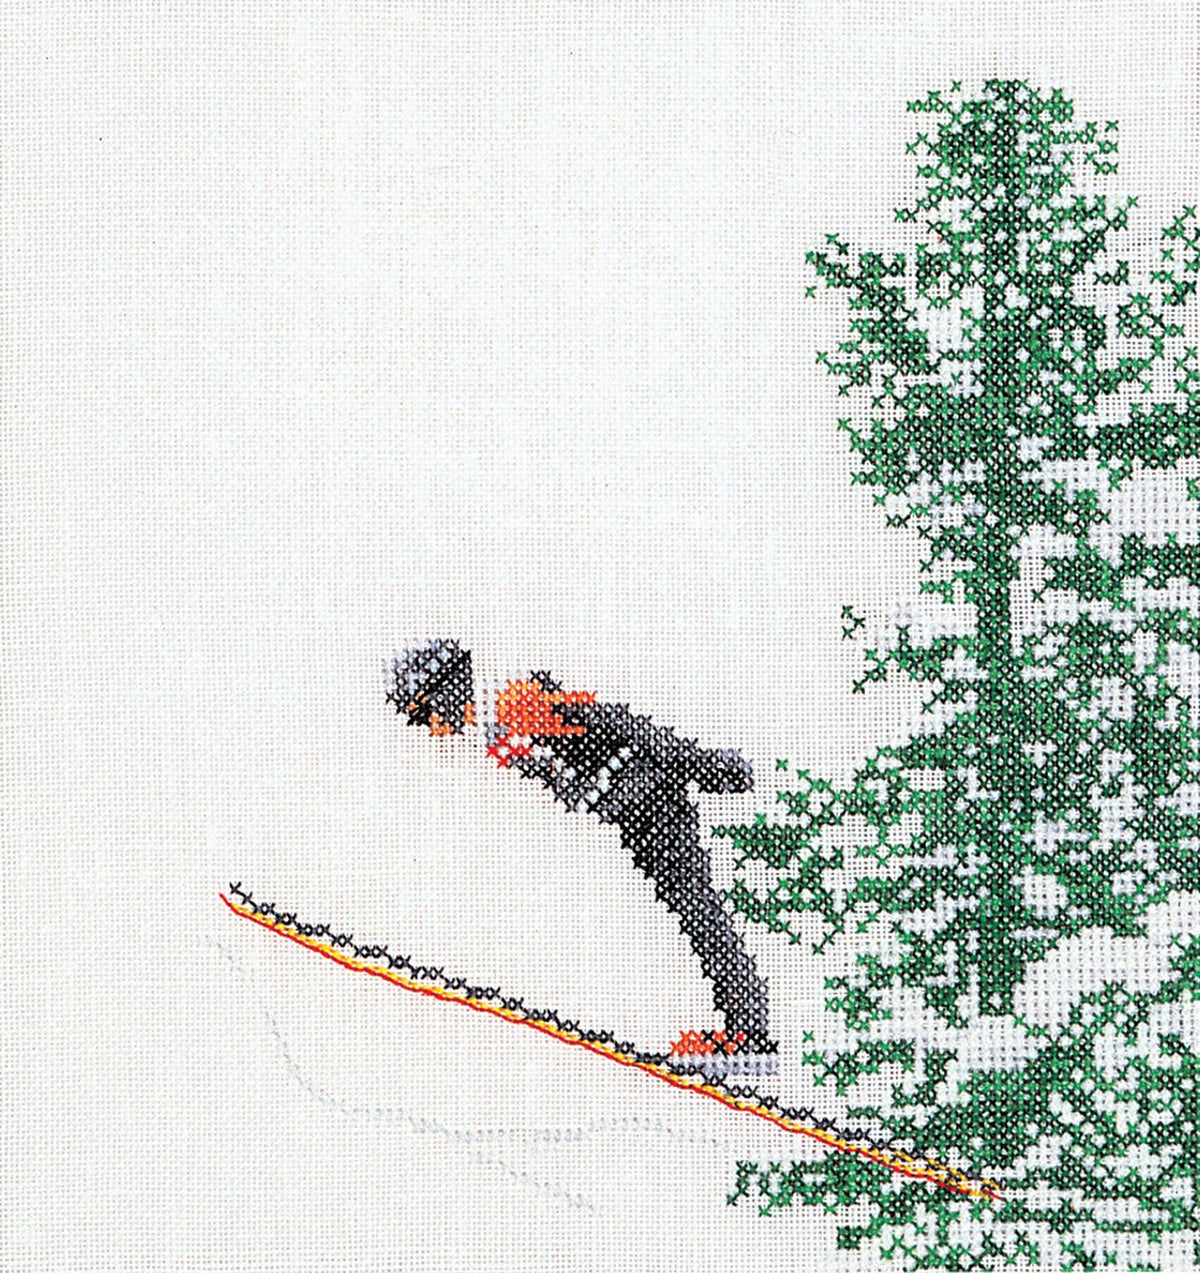 Thea Gouverneur - Counted Cross Stitch Kit - Skiing - Aida - 18 count - 3039A - Thea Gouverneur Since 1959